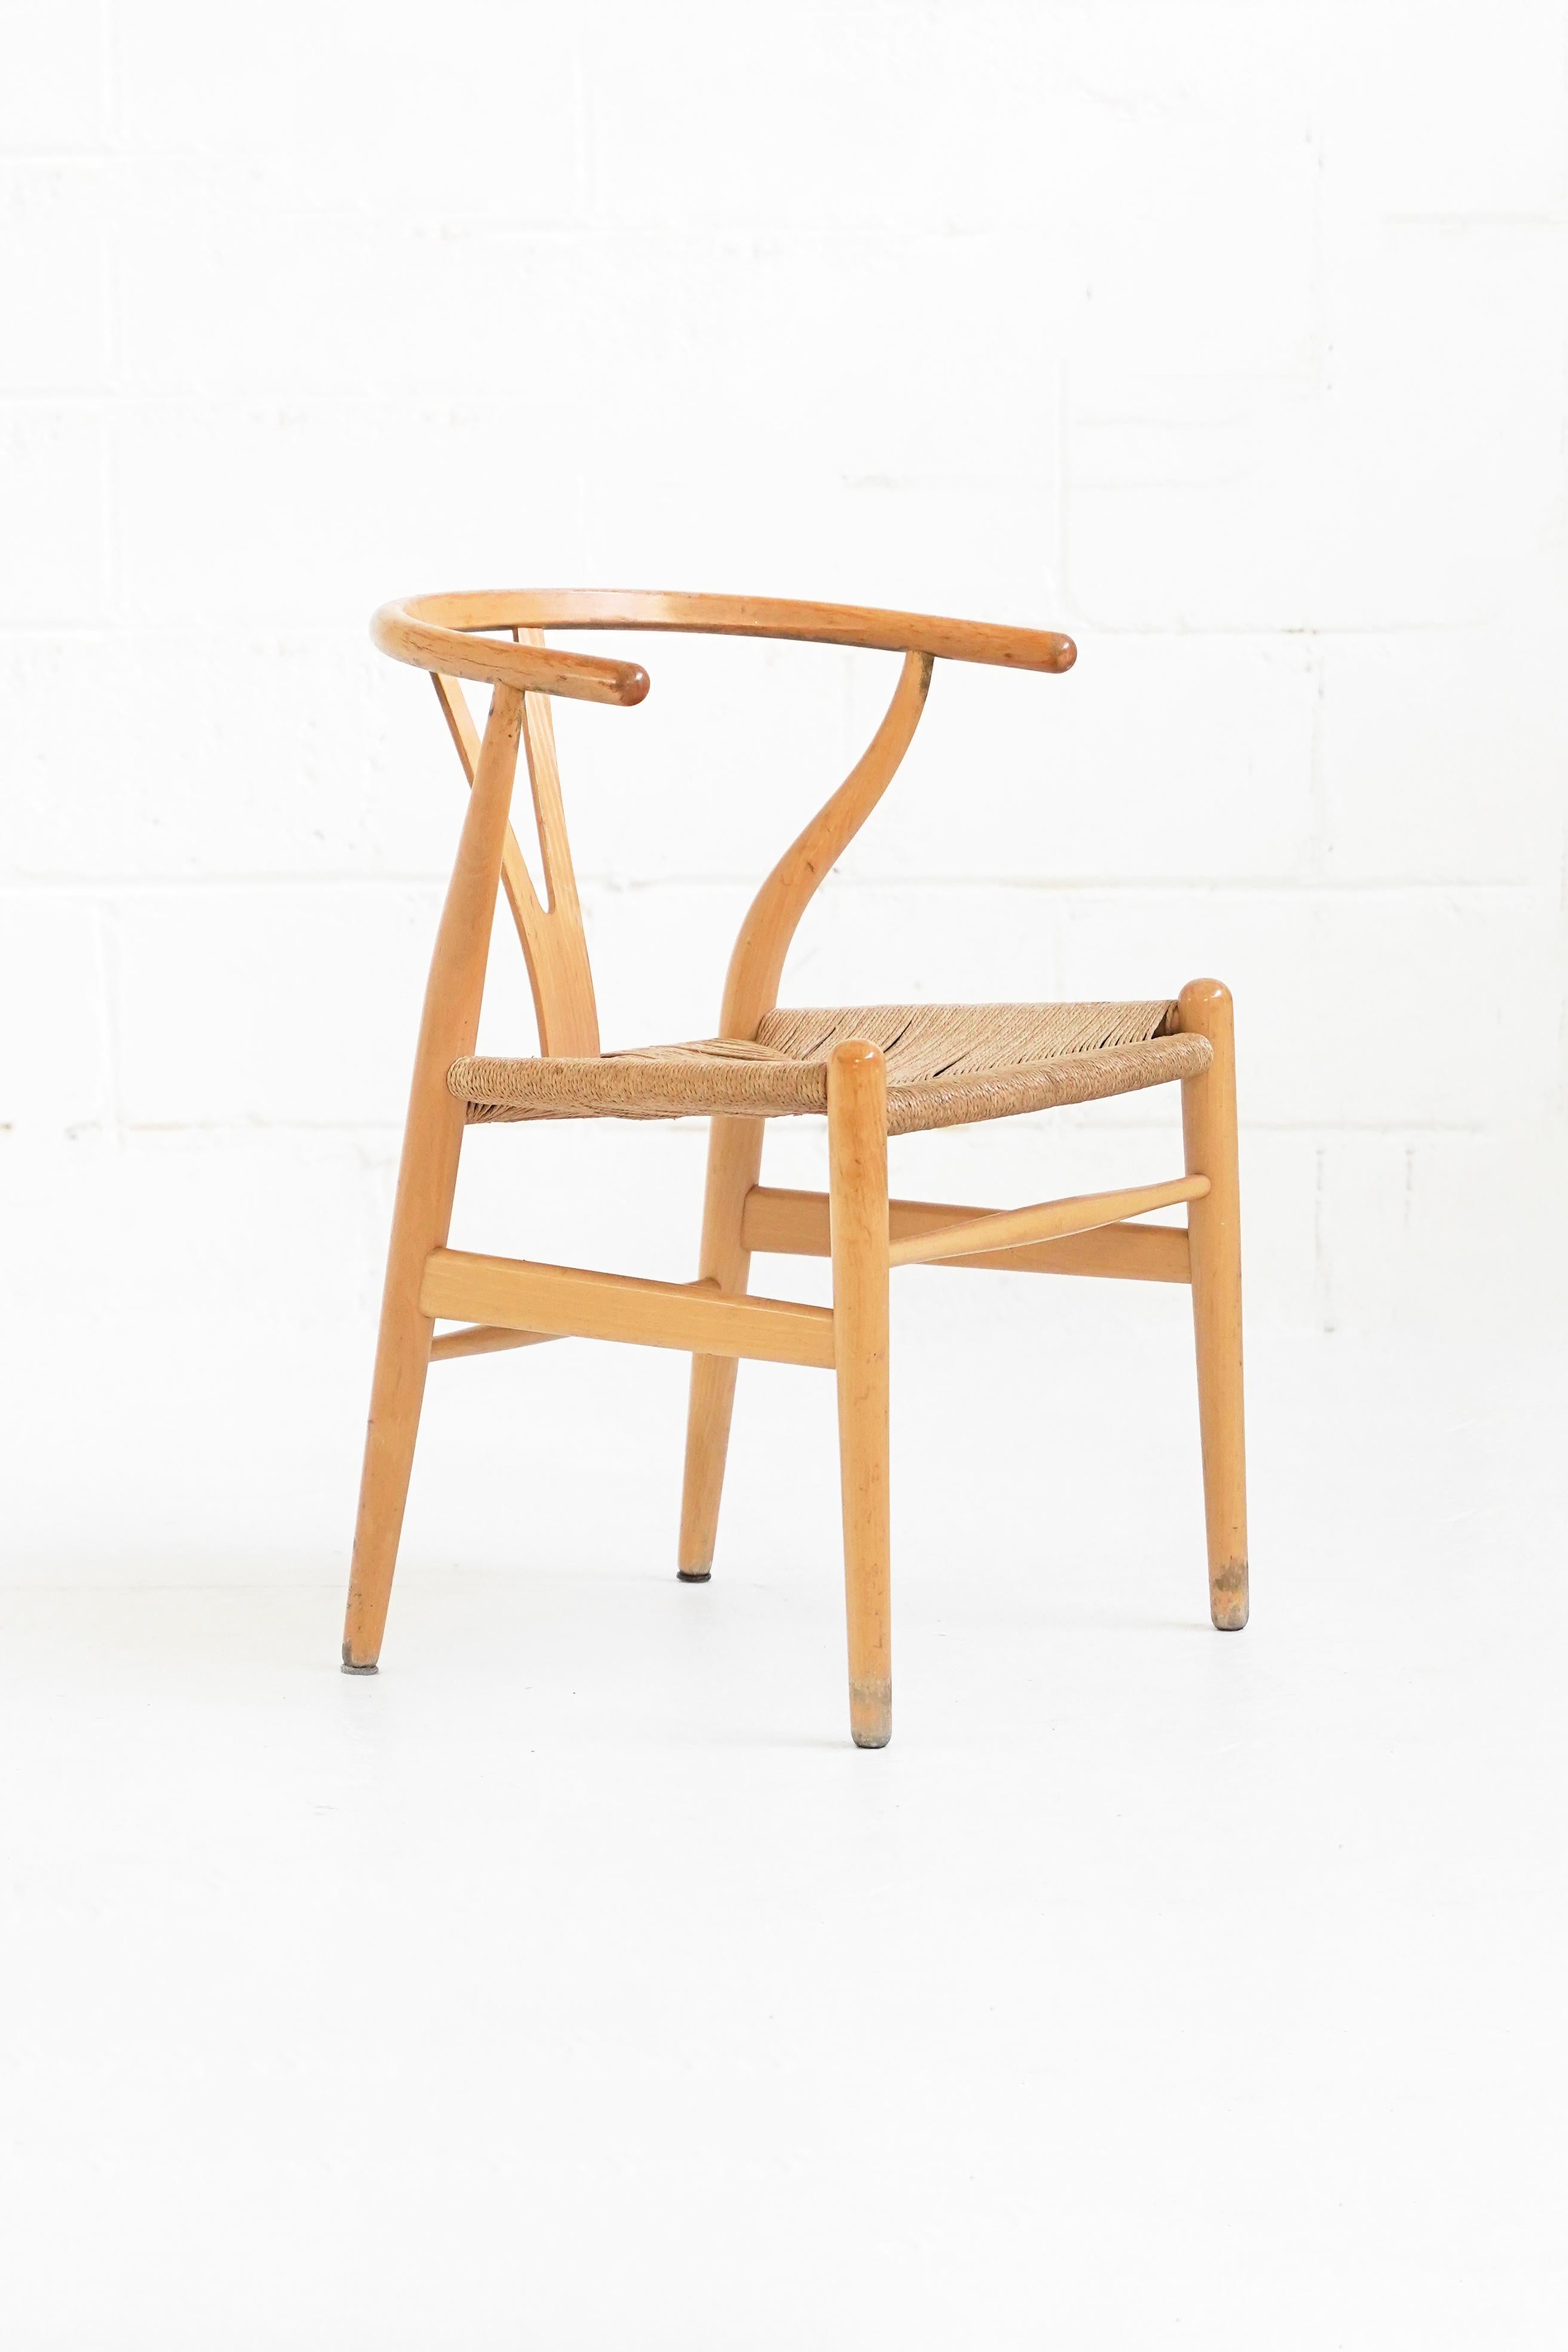 Stunning set of vintage oak wishbone dining chairs by Hans Wegner. They are in their original vintage condition with wear on danish cord and wood frame. A beautiful vintage look consistent with age of pieces.